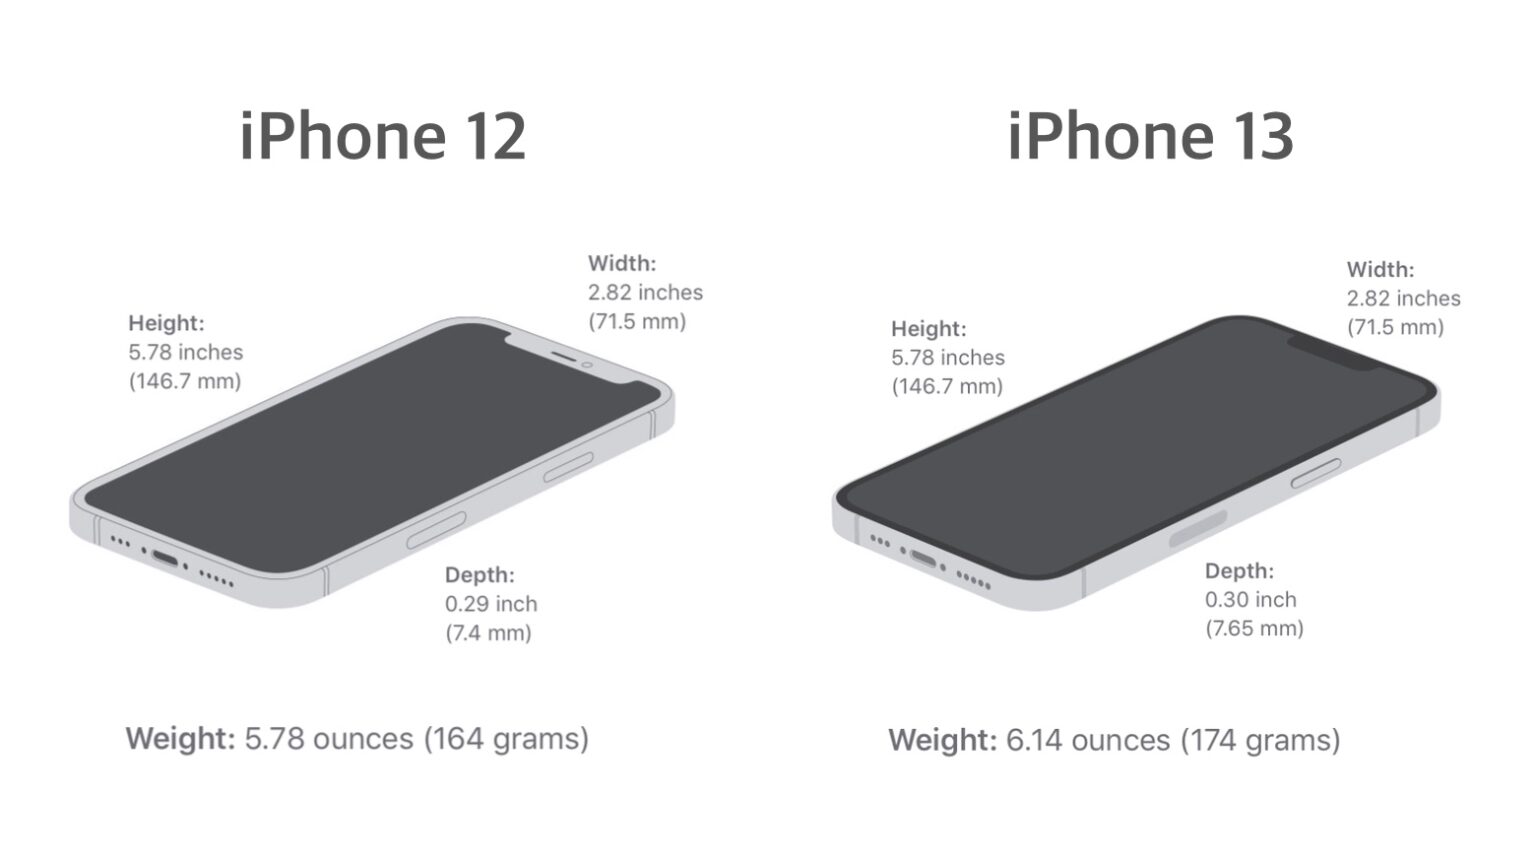 iPhone 13 battery improvements come at the cost of increased weight